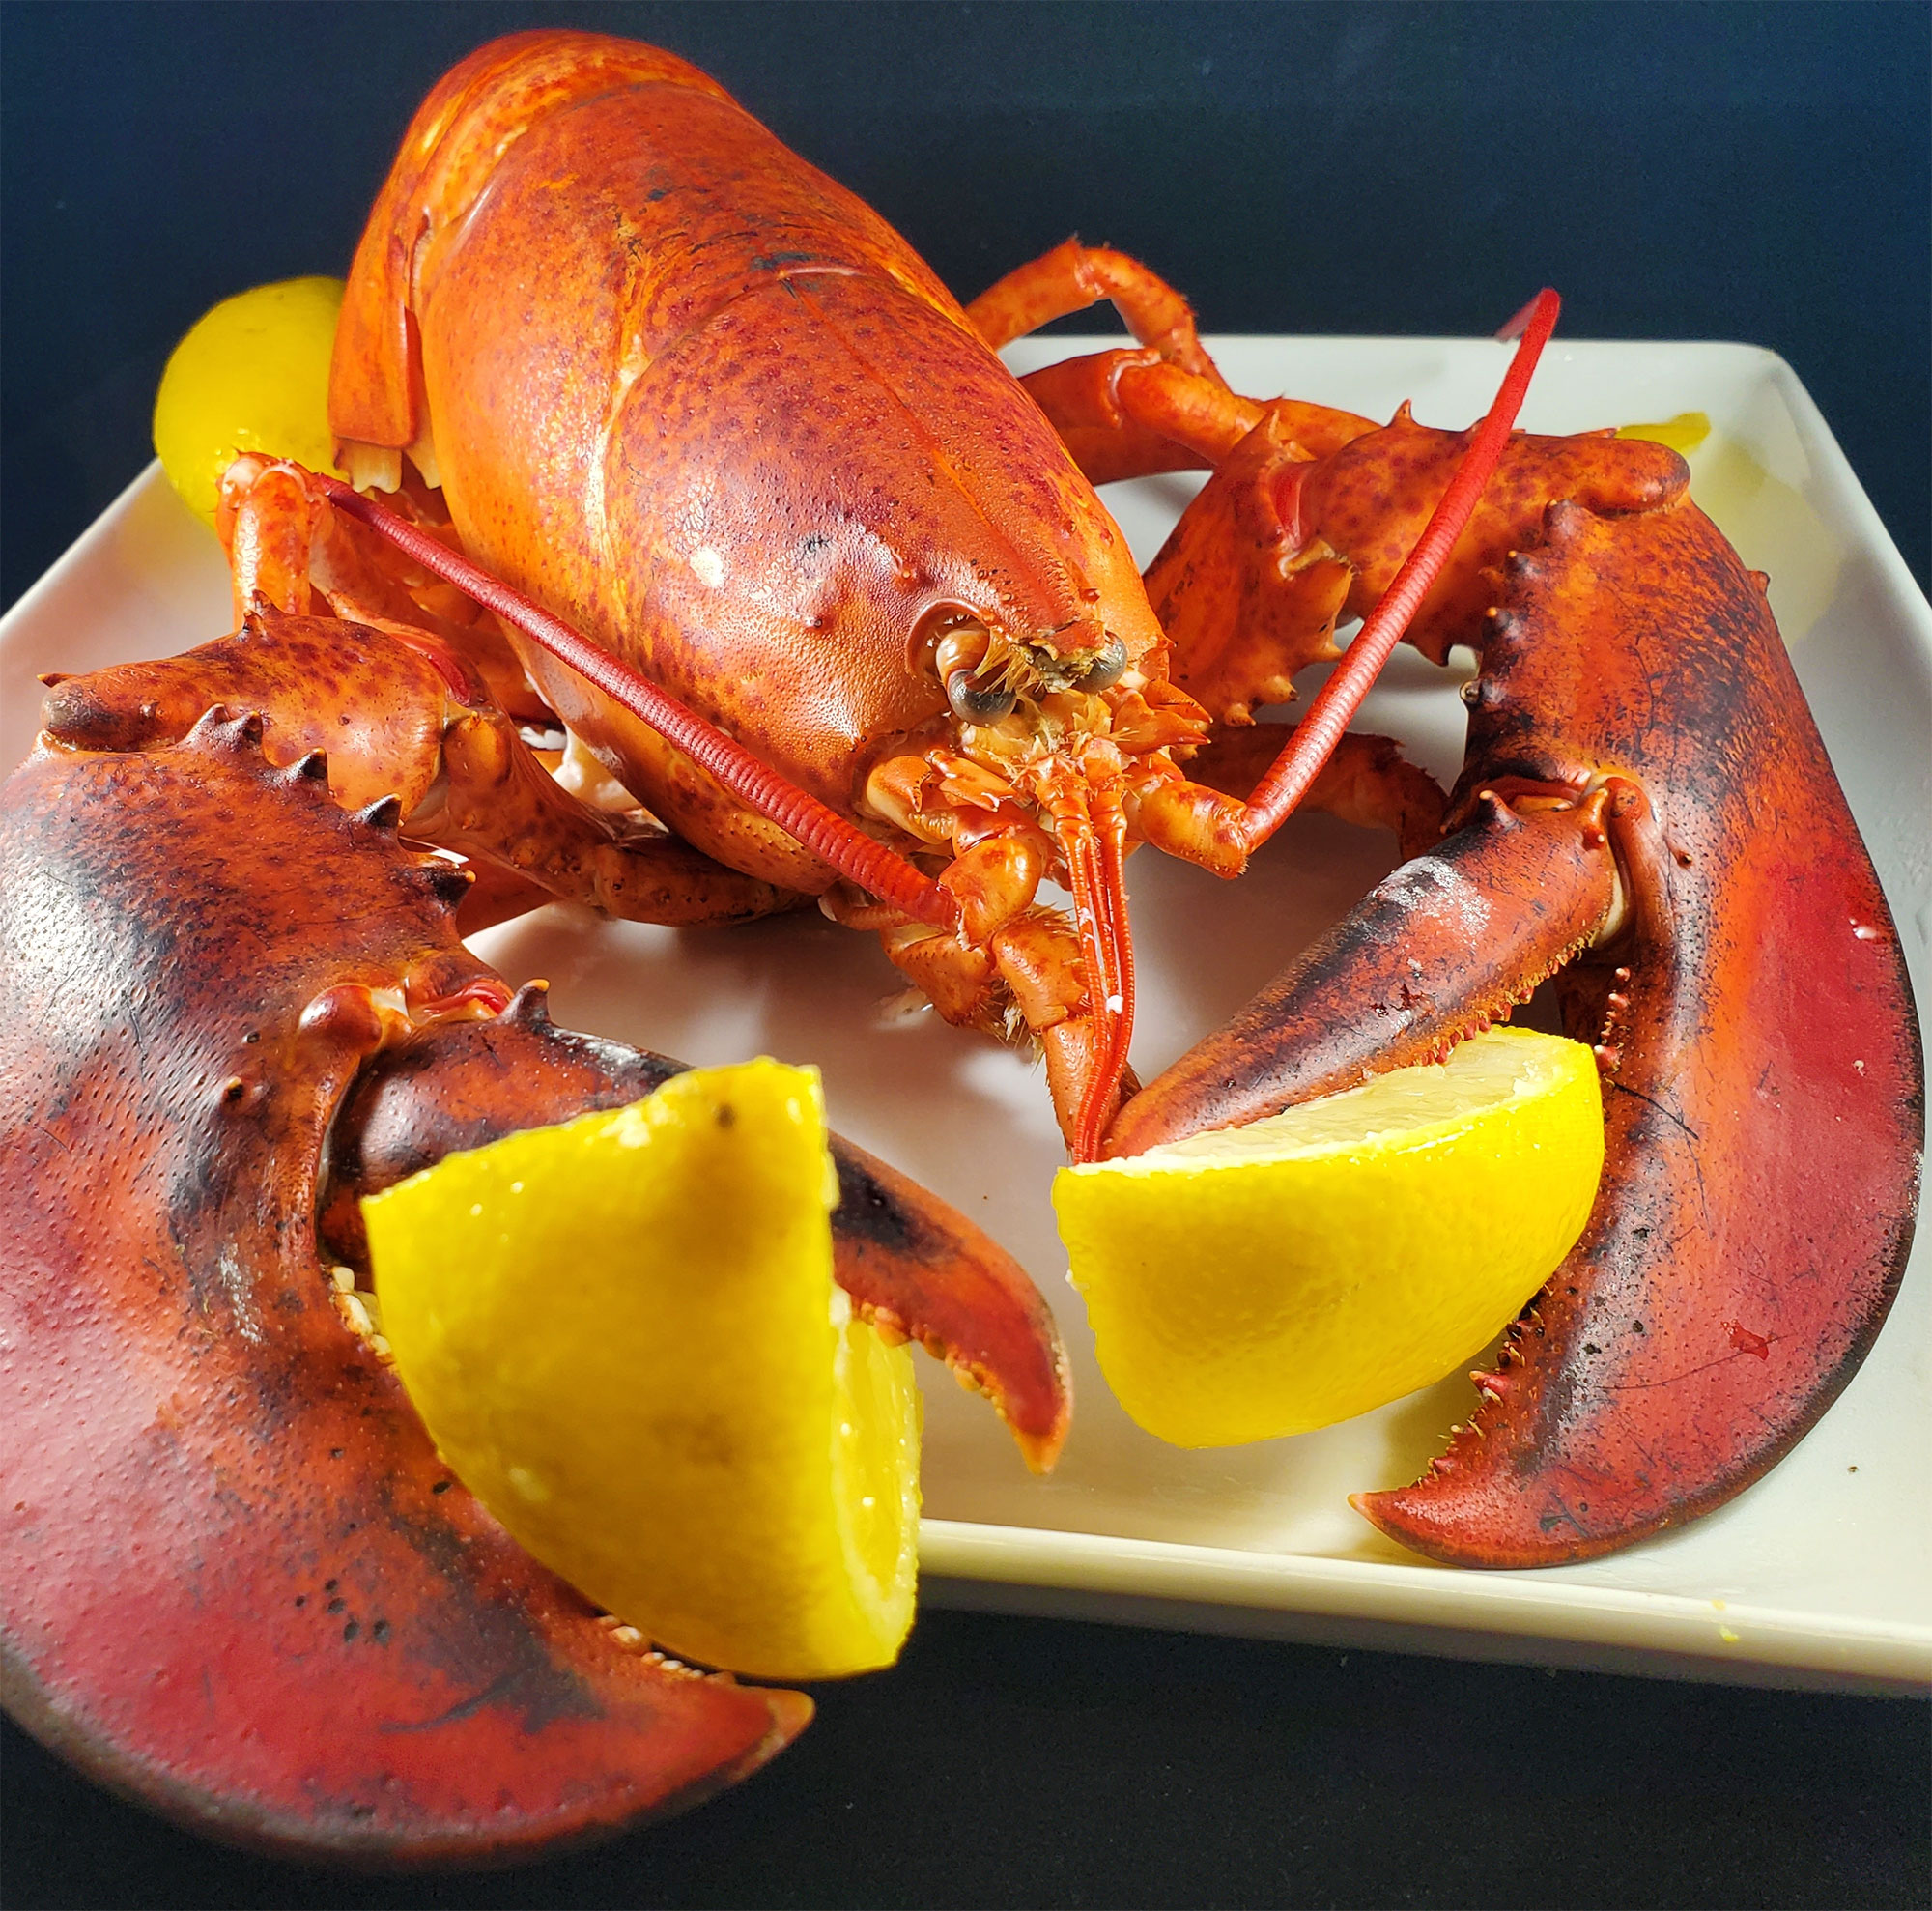 Boiled Lobster with Spicy Garlic Butter Dipping Sauce